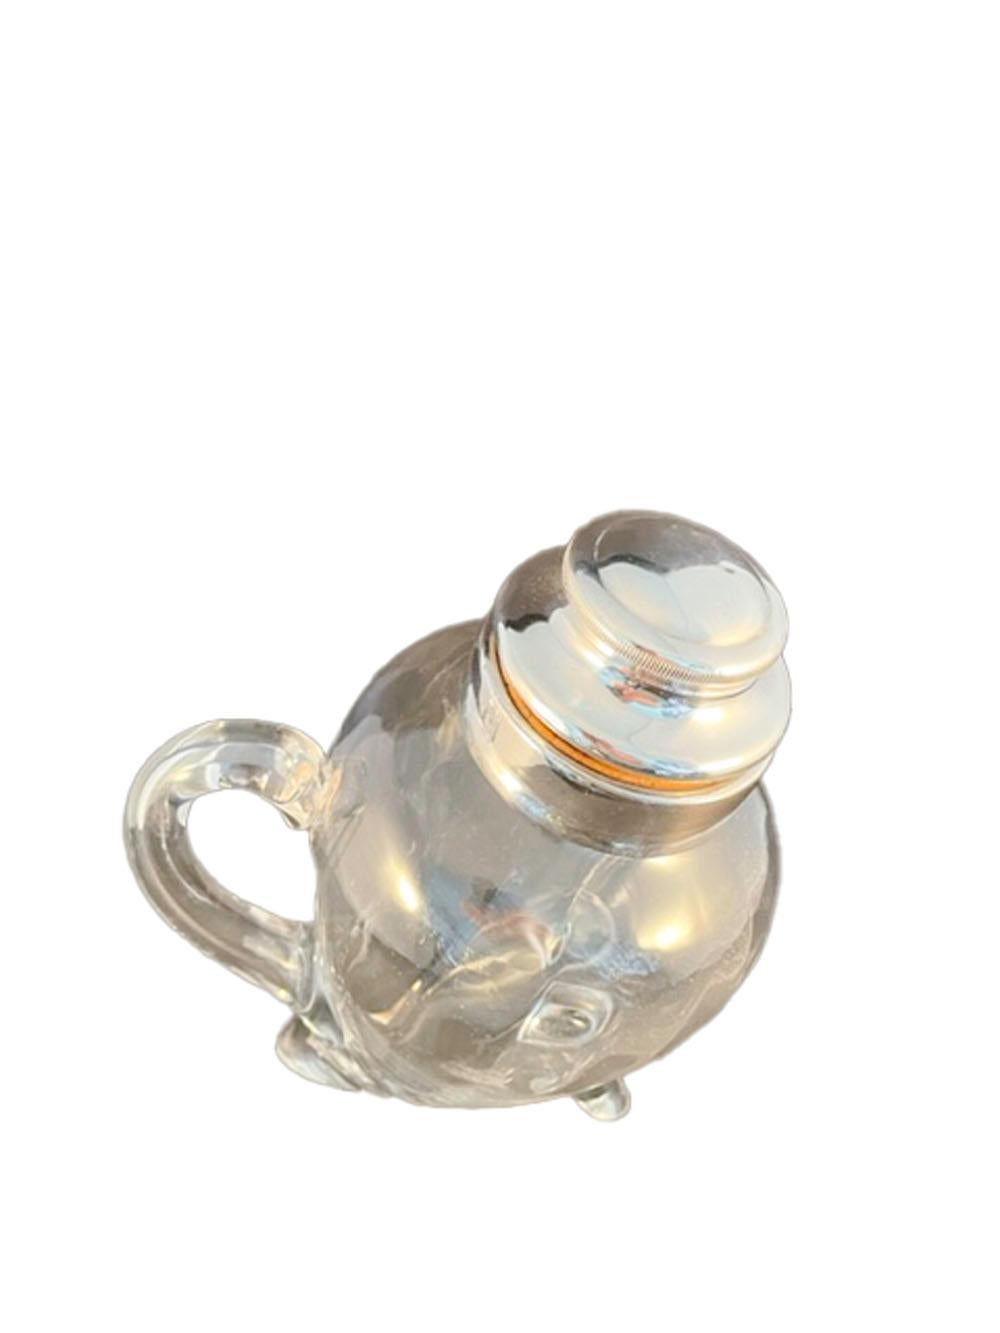 Unusual blown glass cocktail shaker of 'duck-body' form with applied handle and 'feet'. The shakers mouth with a silver plate collar fitted with a silver plate and cork stopper, the interior of the stopper with an integral icebreaker/muddler.